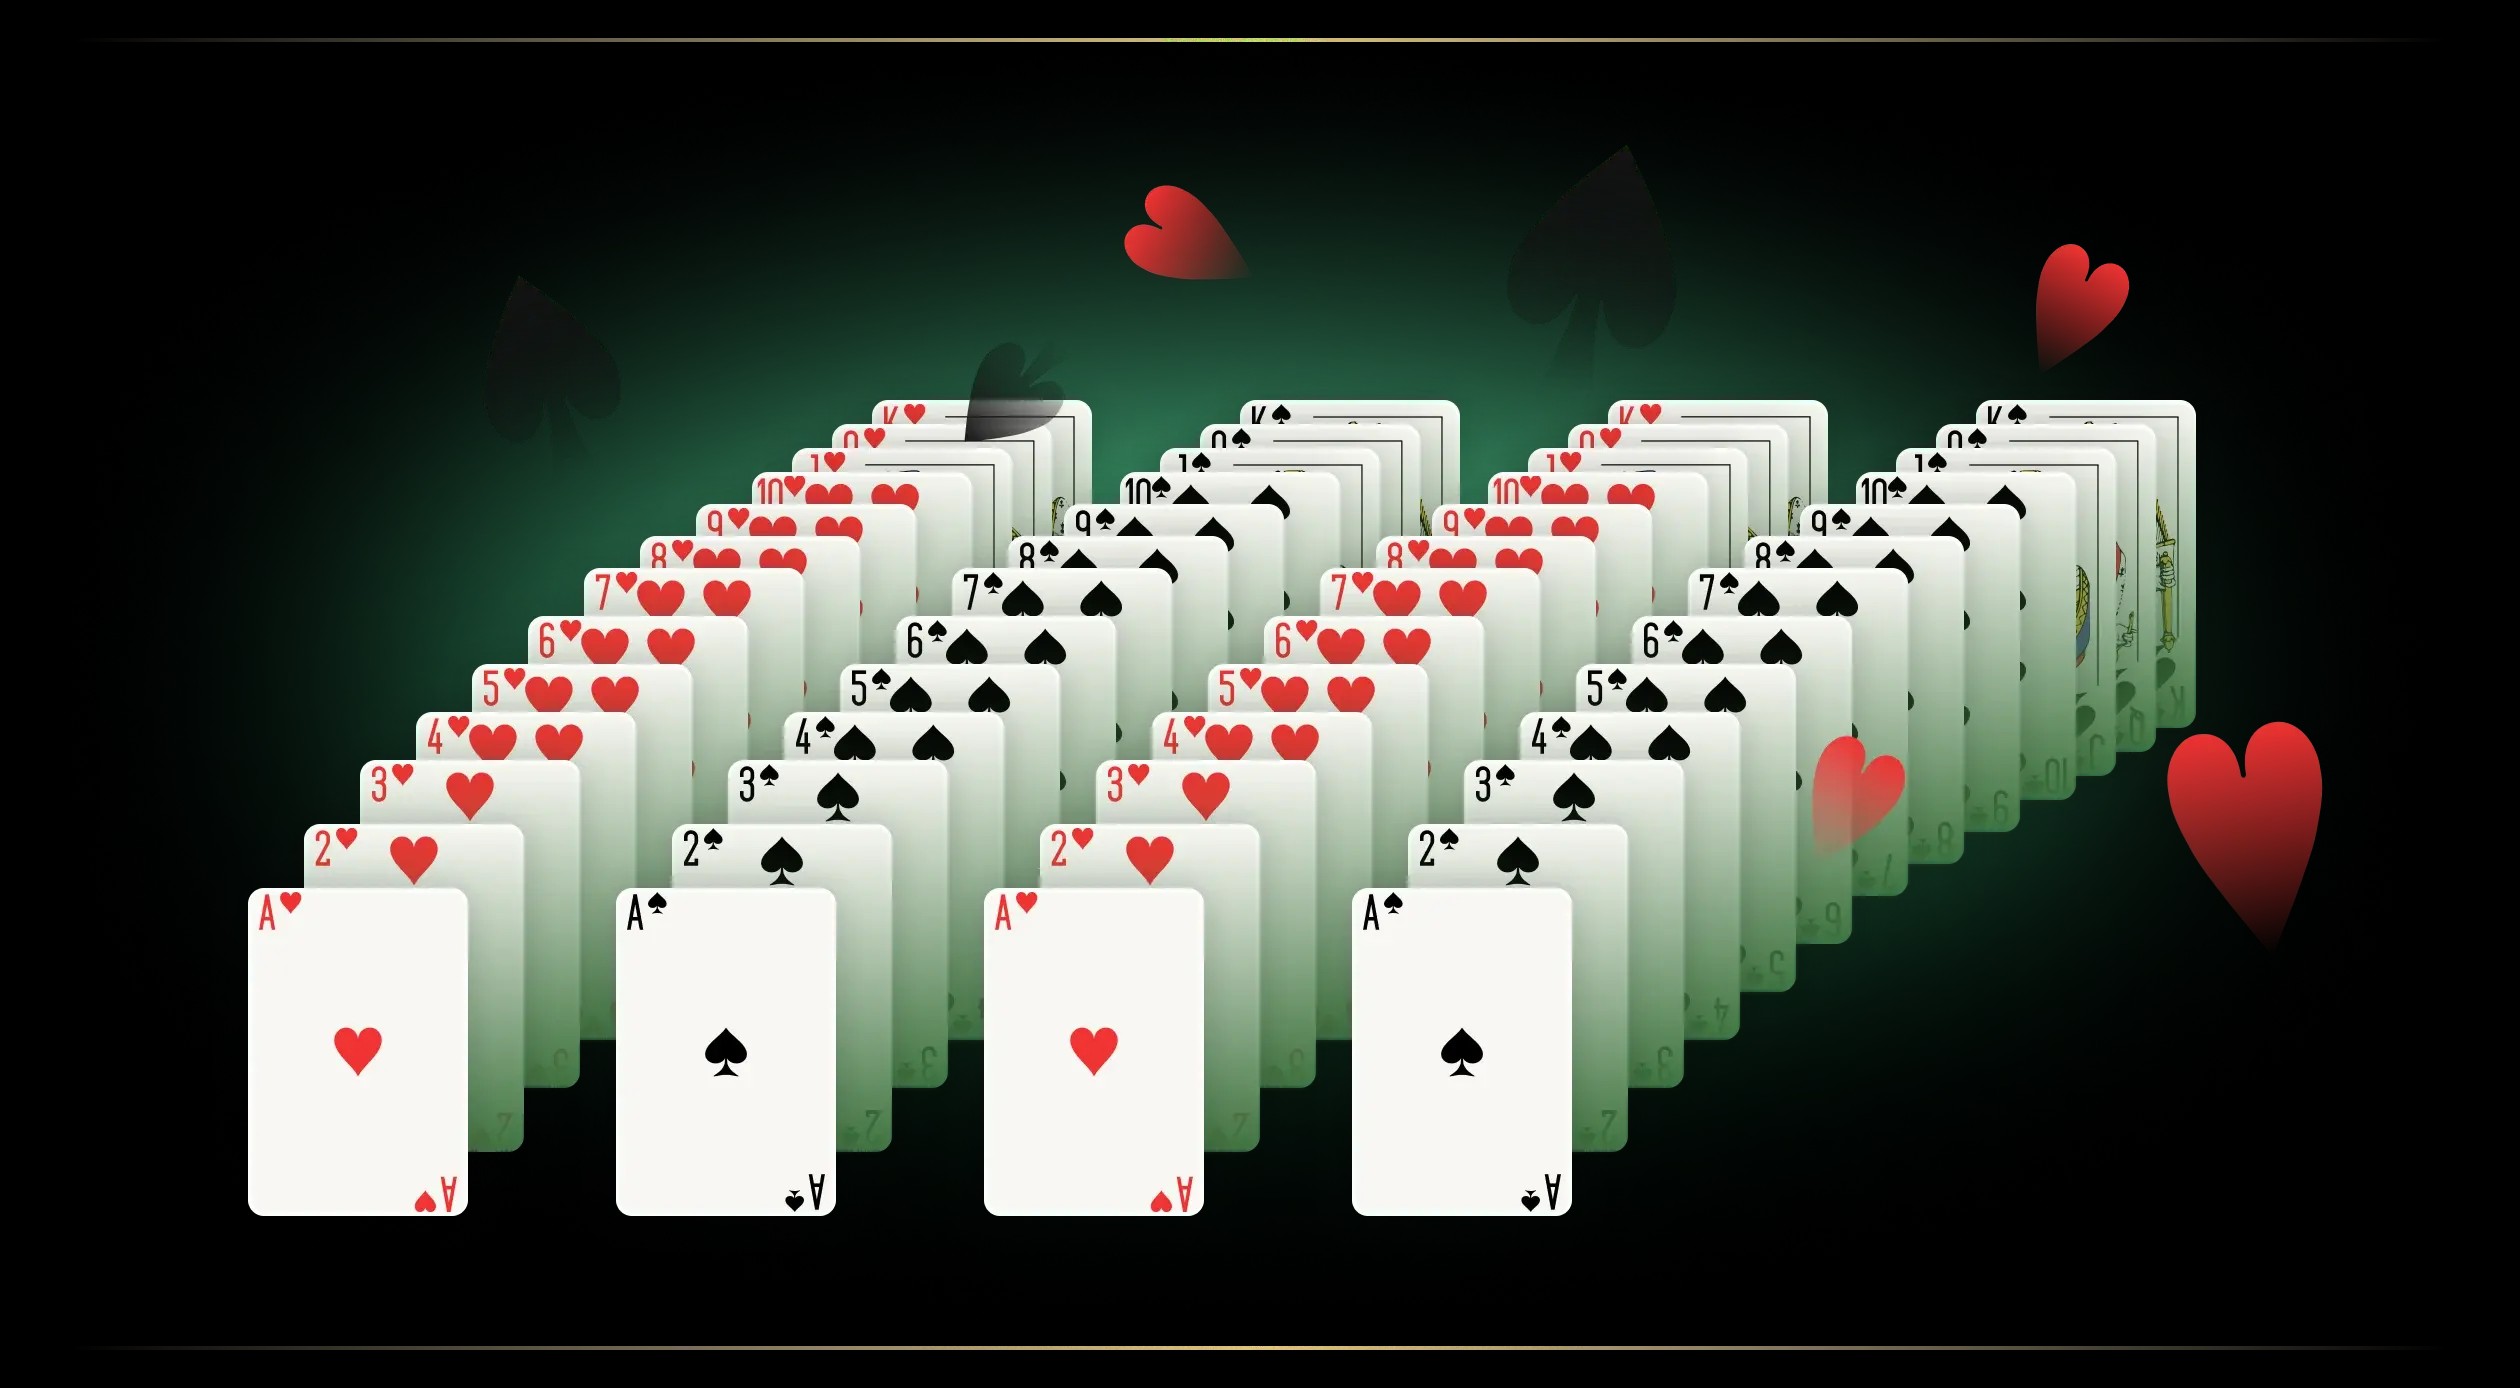 King of the Solitaire